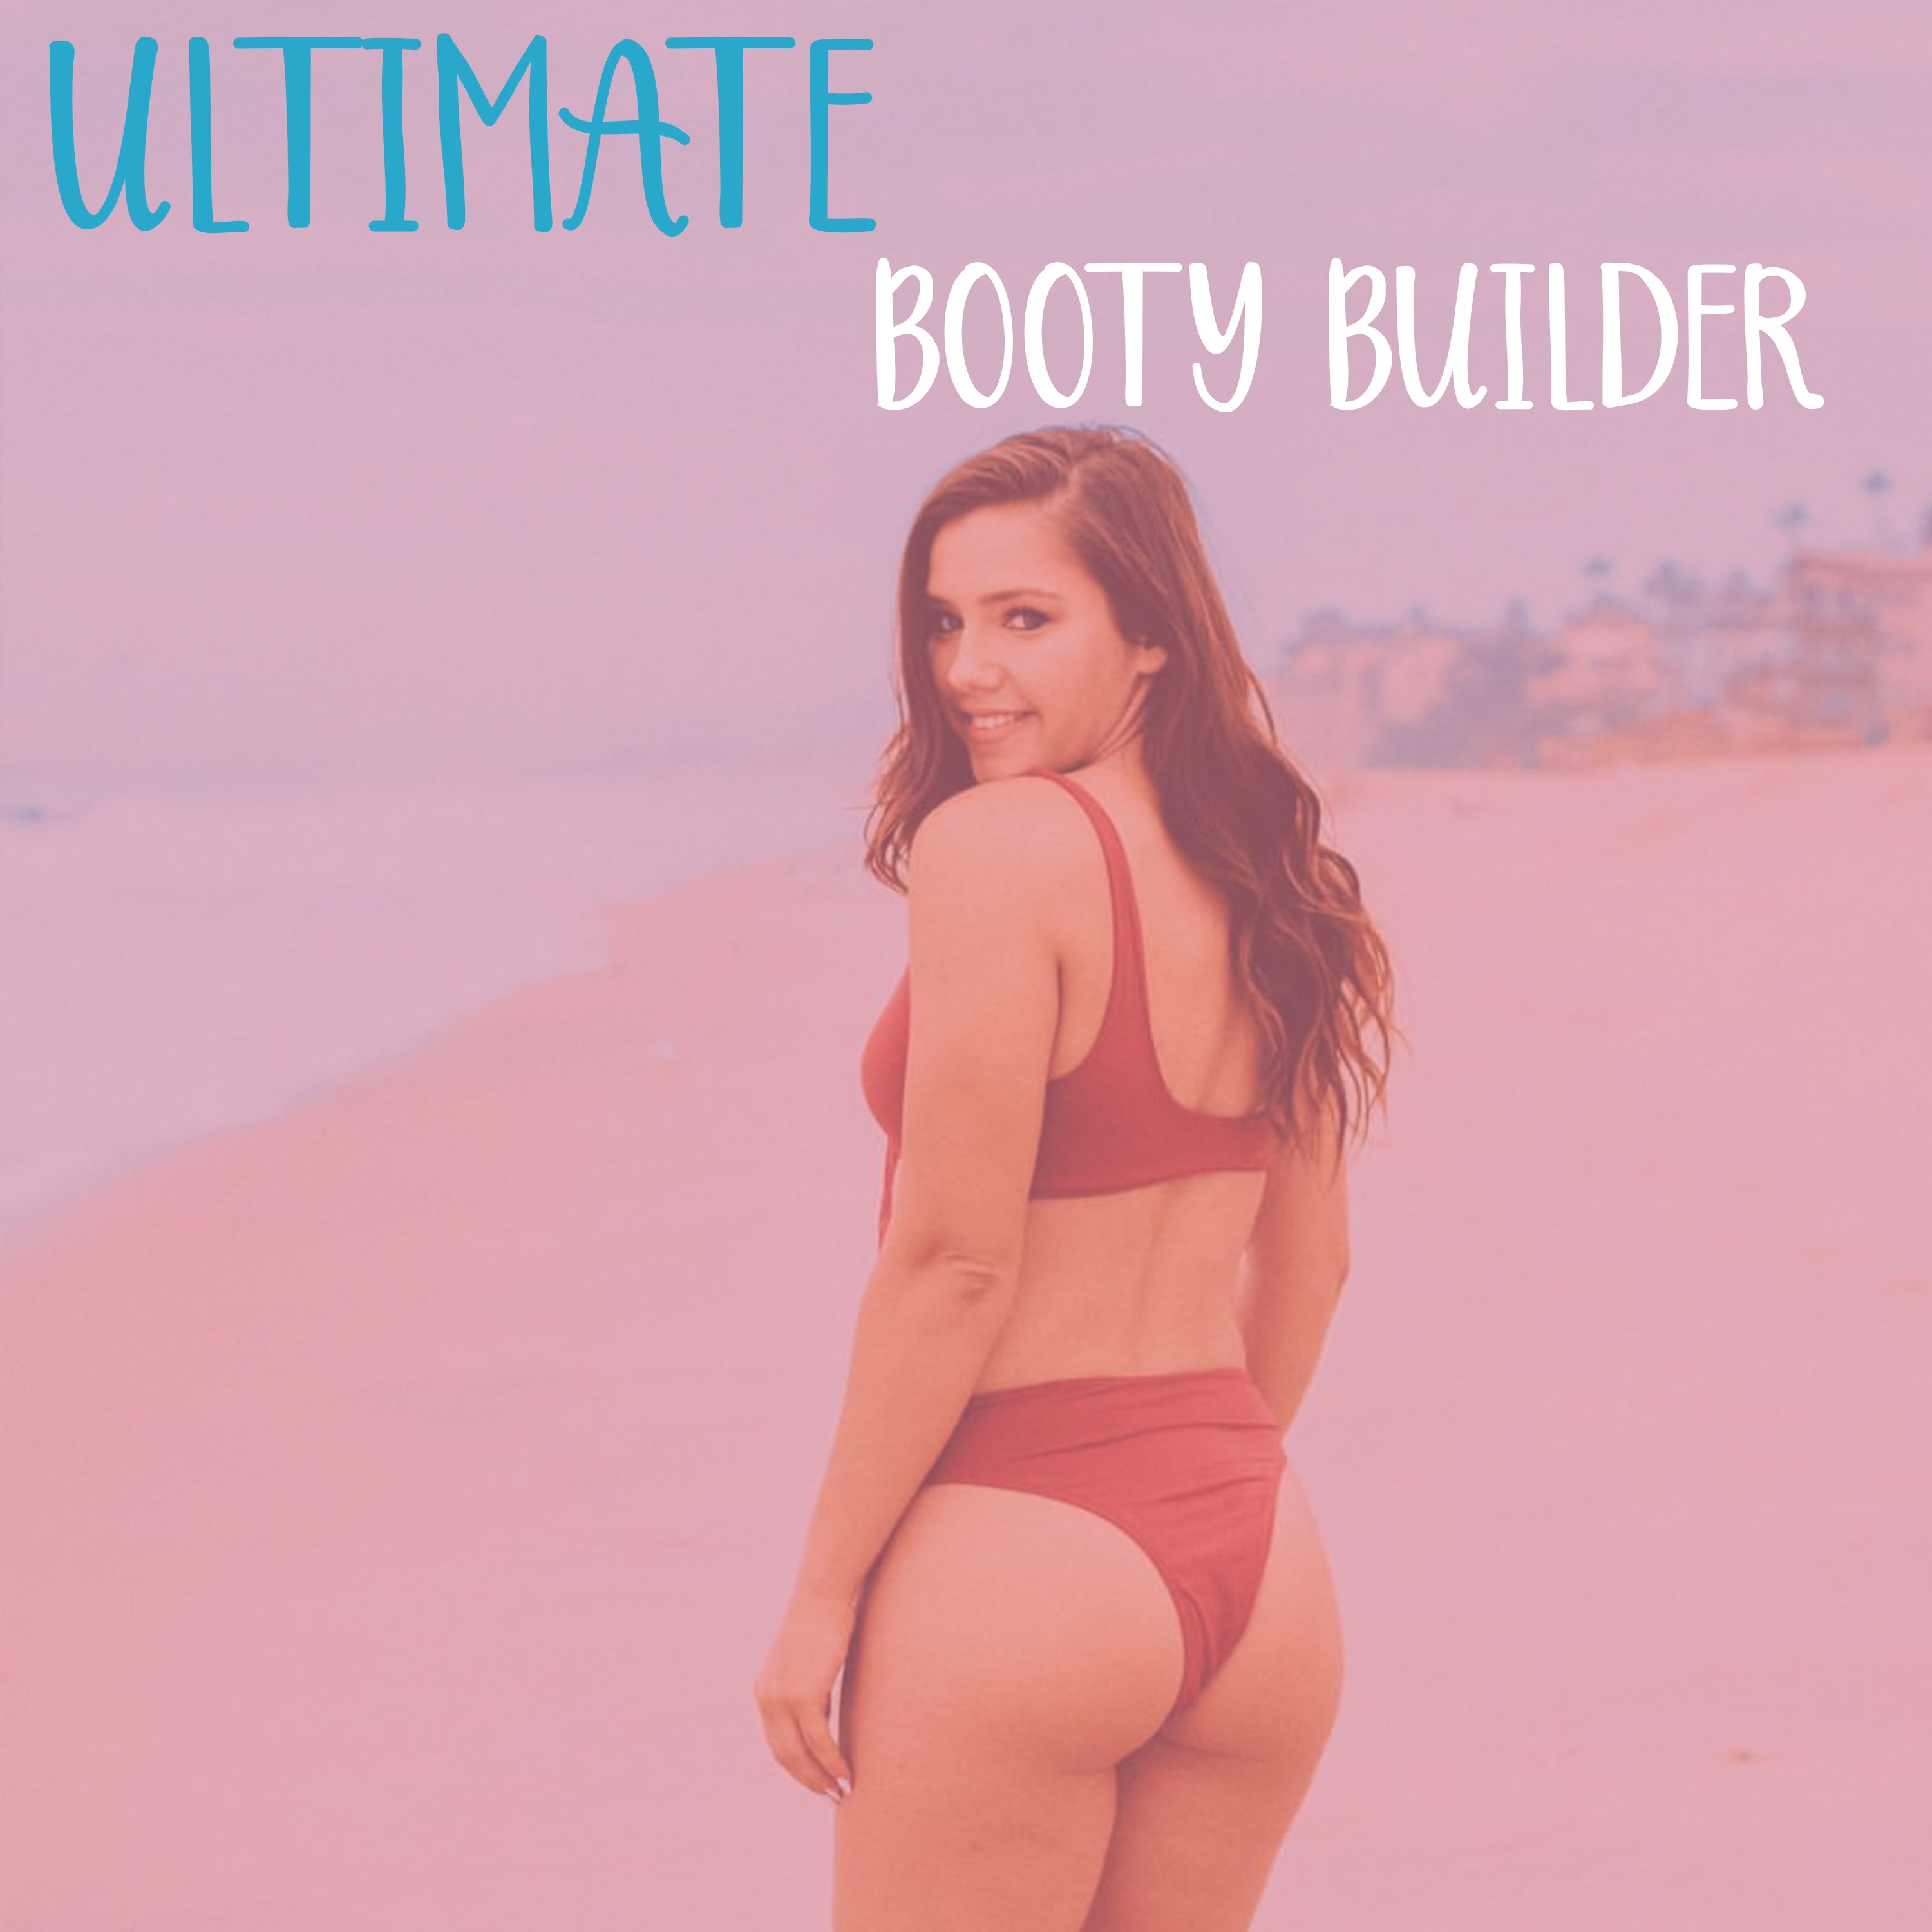 Ultimate Booty Builder